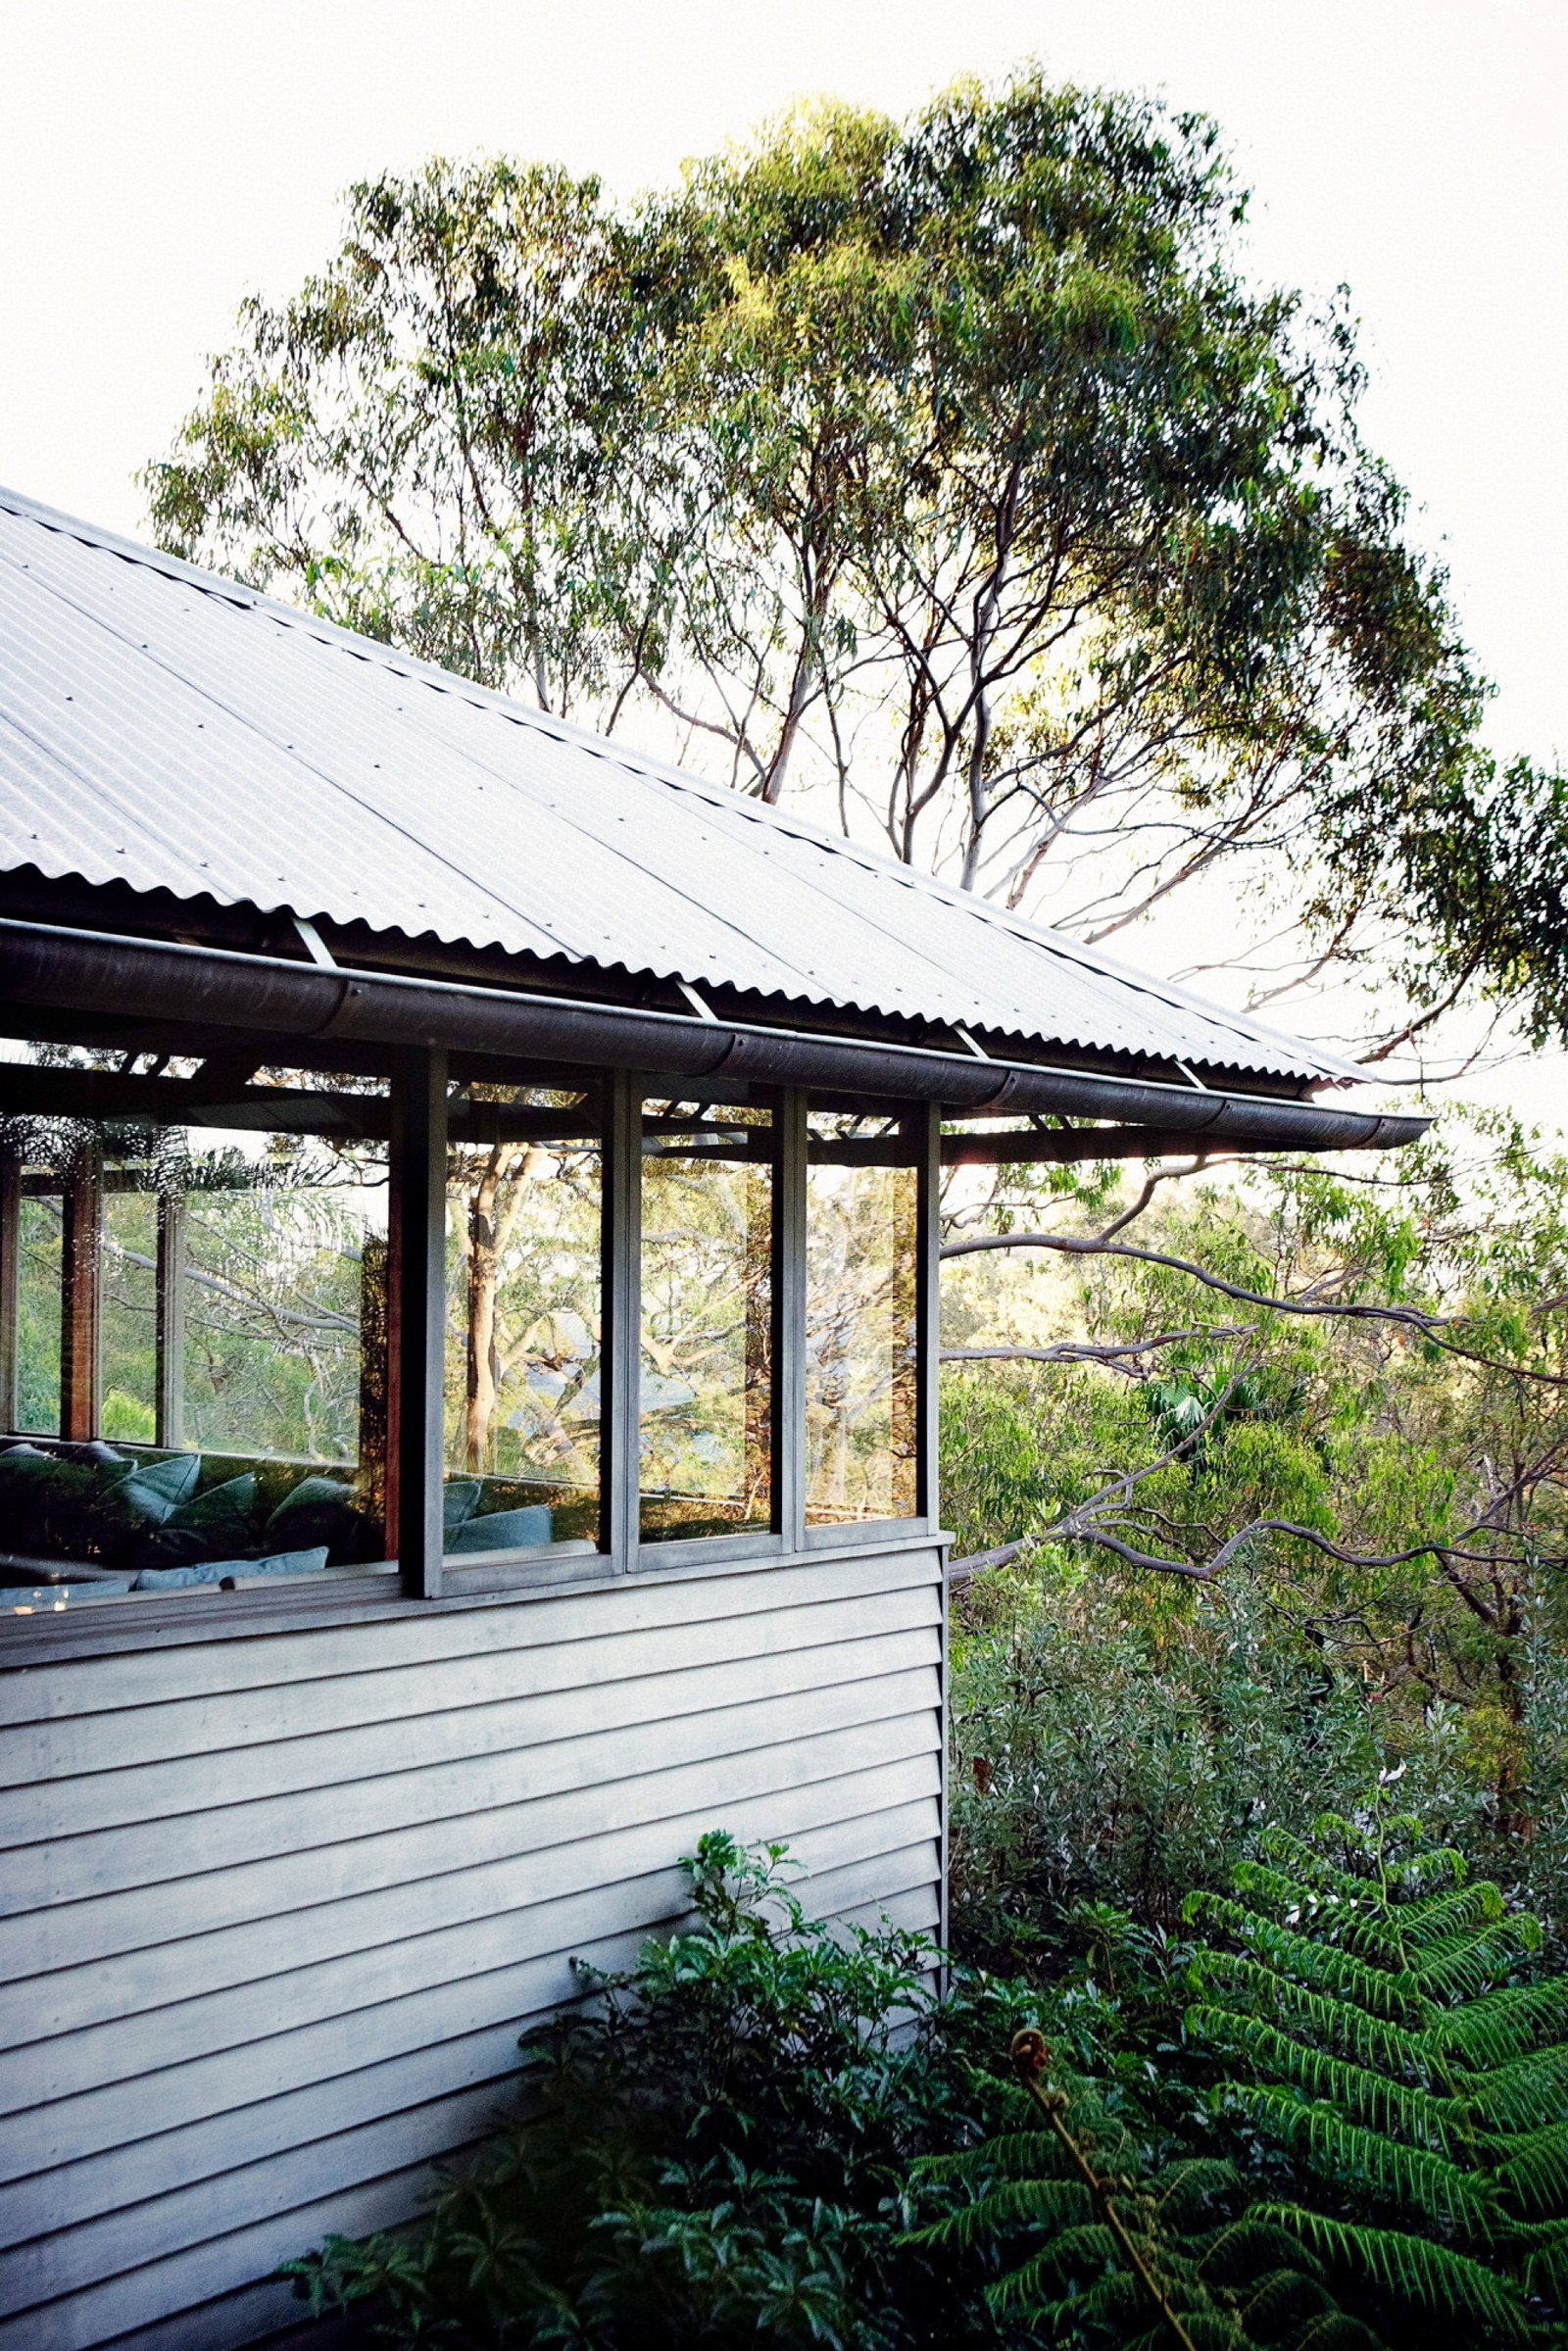 Photograph of a corner of the house with large glass windows, timber cladding and corrugated tin roof. It is surrounded by native tree tops